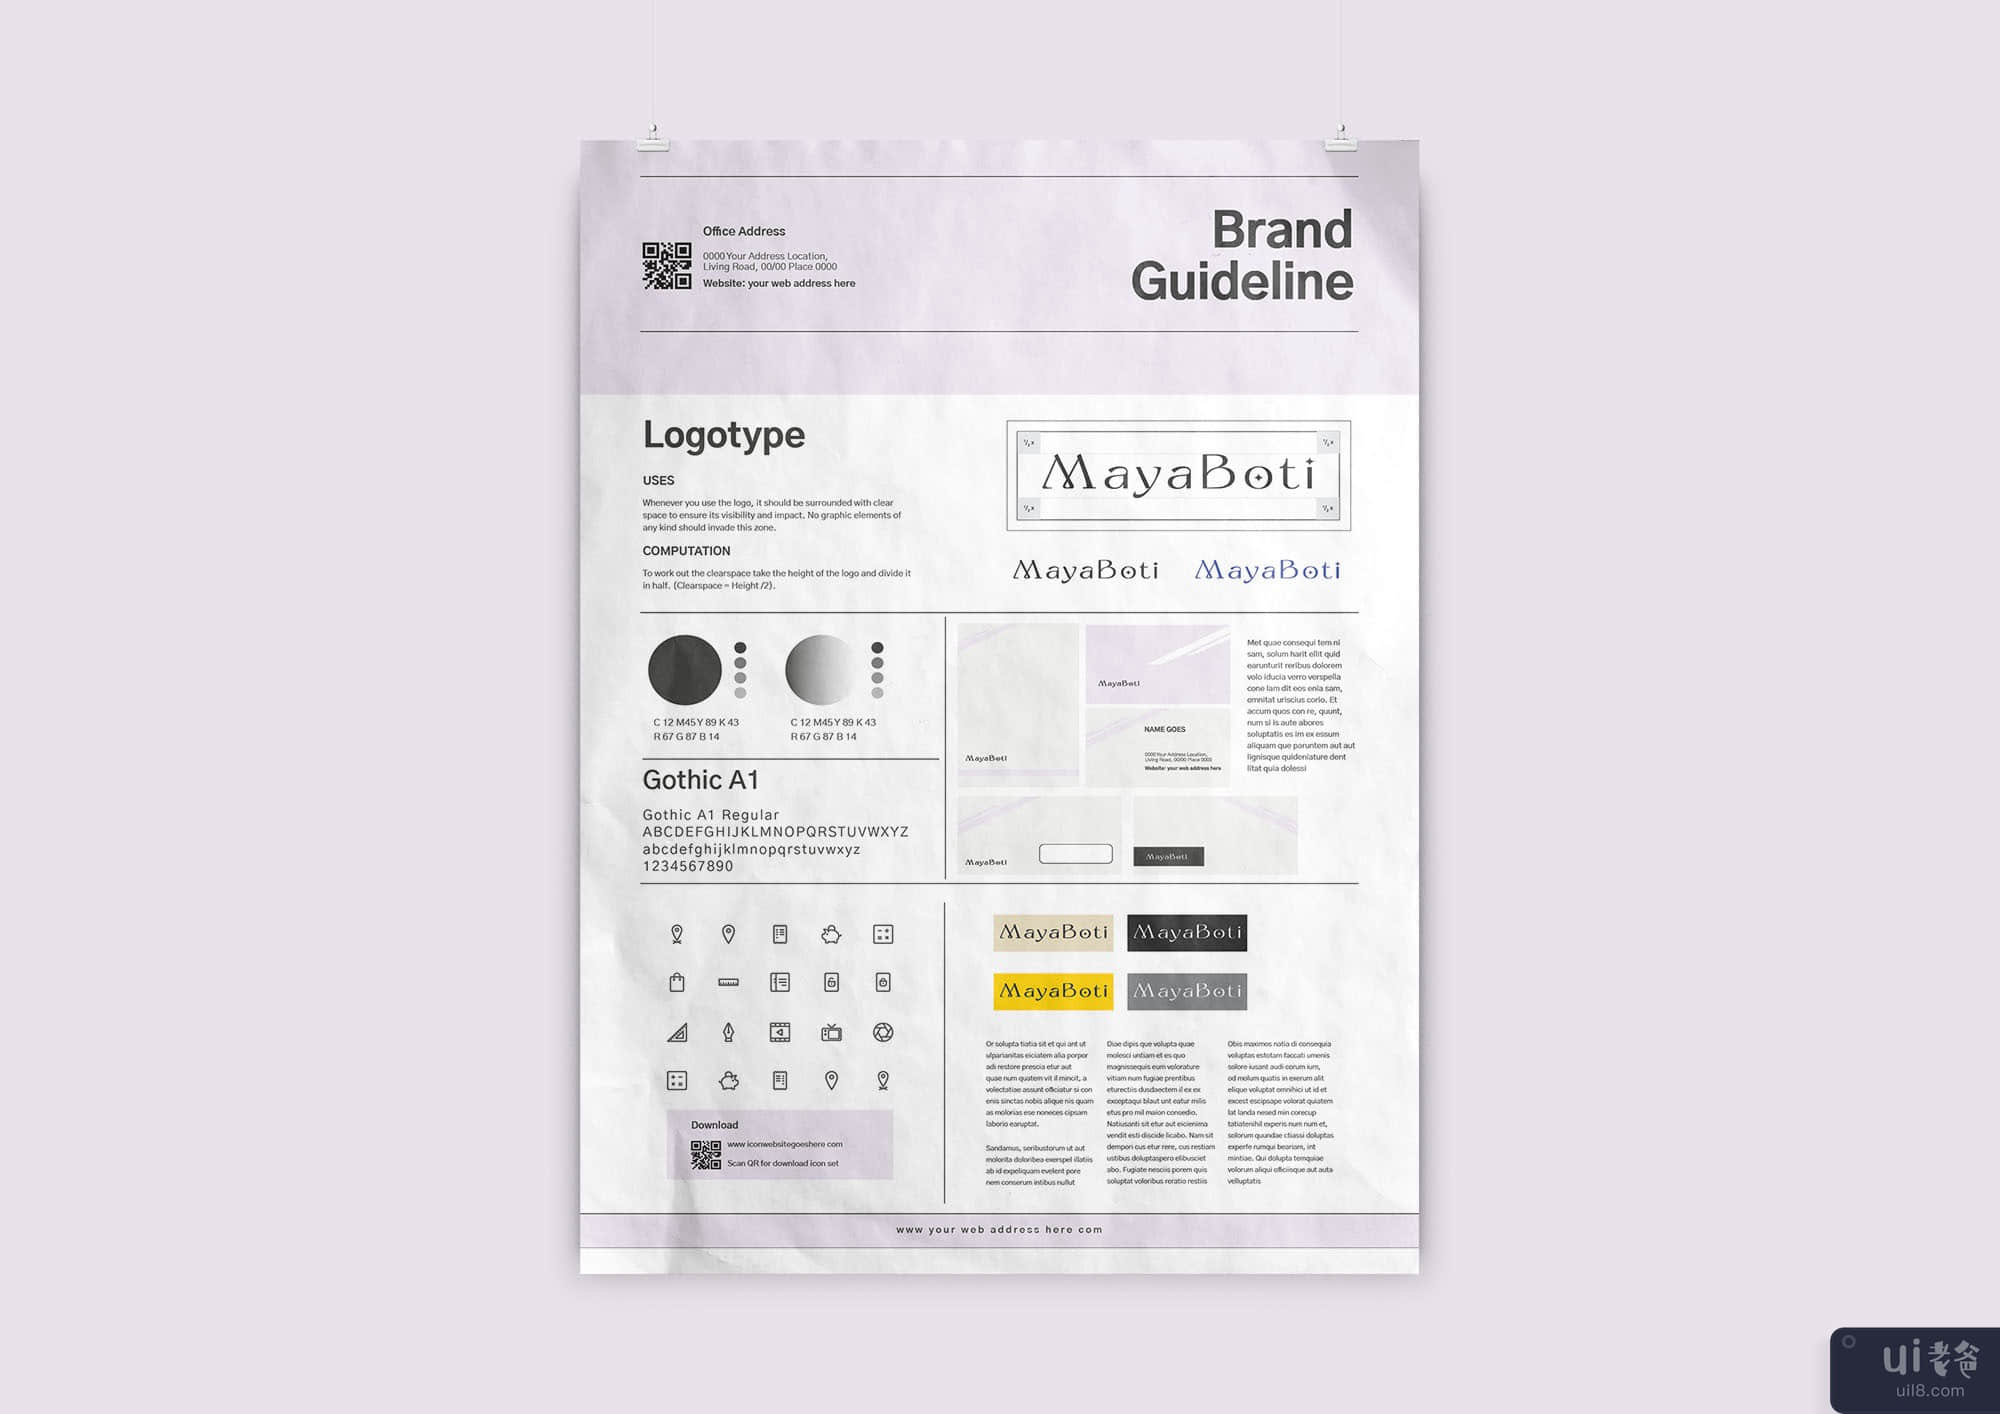 A3 品牌指南海报 Din A3 品牌指南海报(A3 Brand Guideline poster Din A3 Brand Guideline poster)插图6